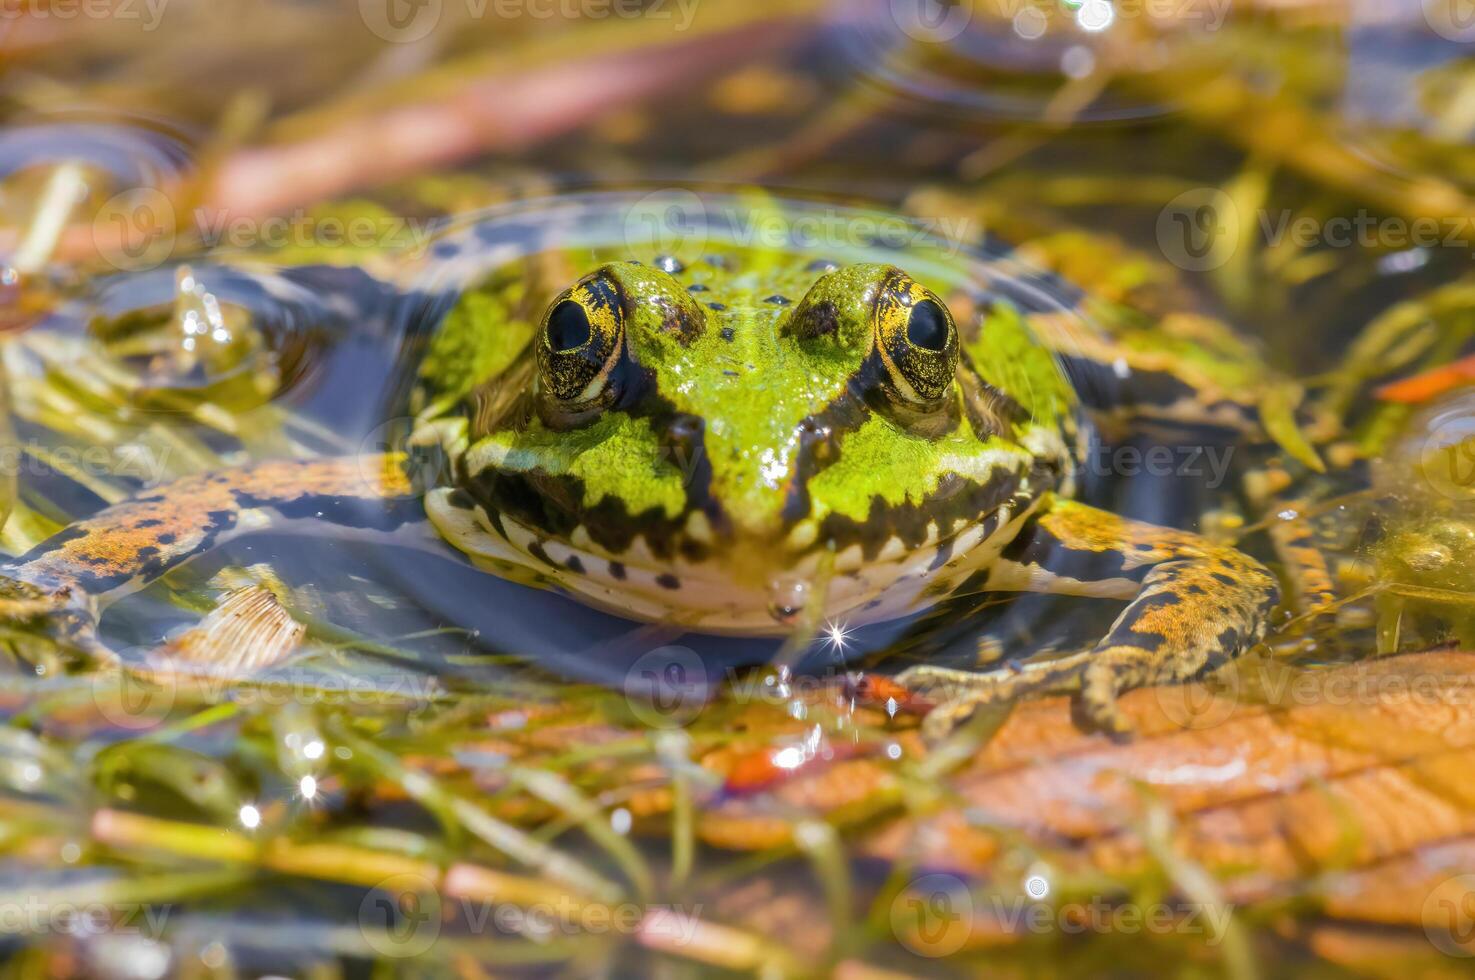 slippery frog in a pond in nature photo